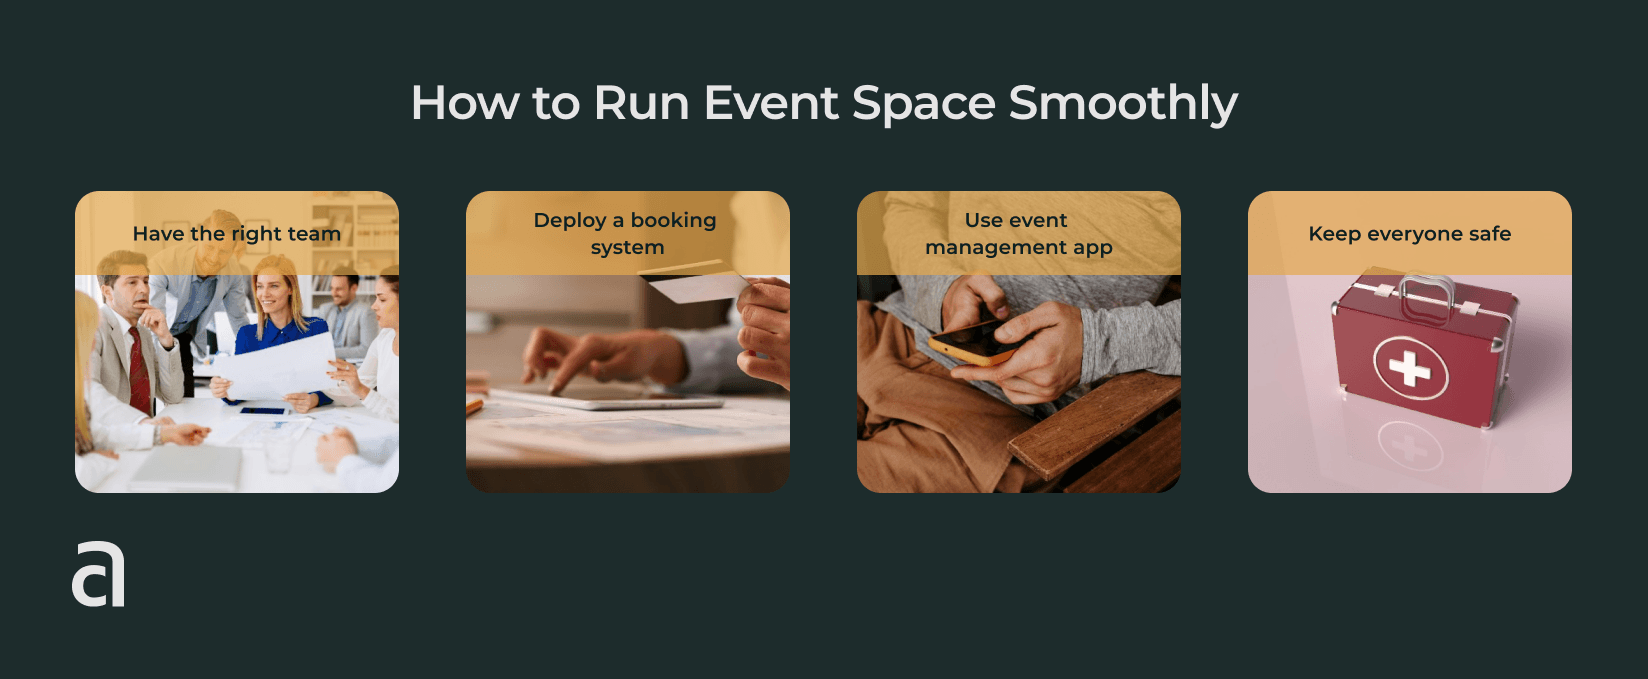 How to run event space smoothly